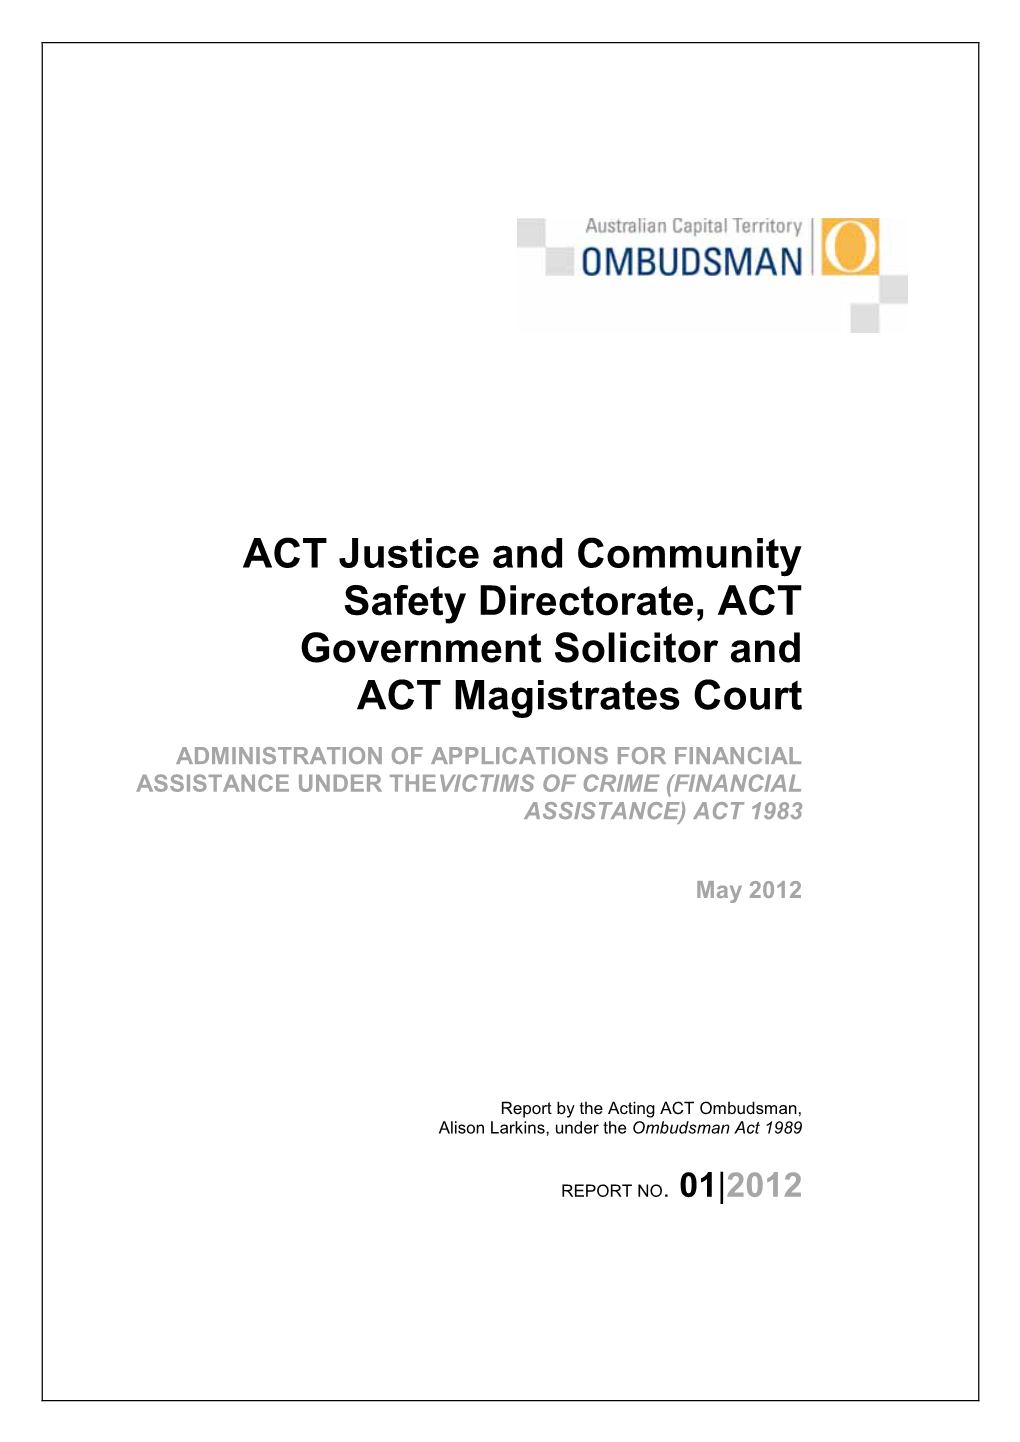 May 2012: Justice and Community Safety